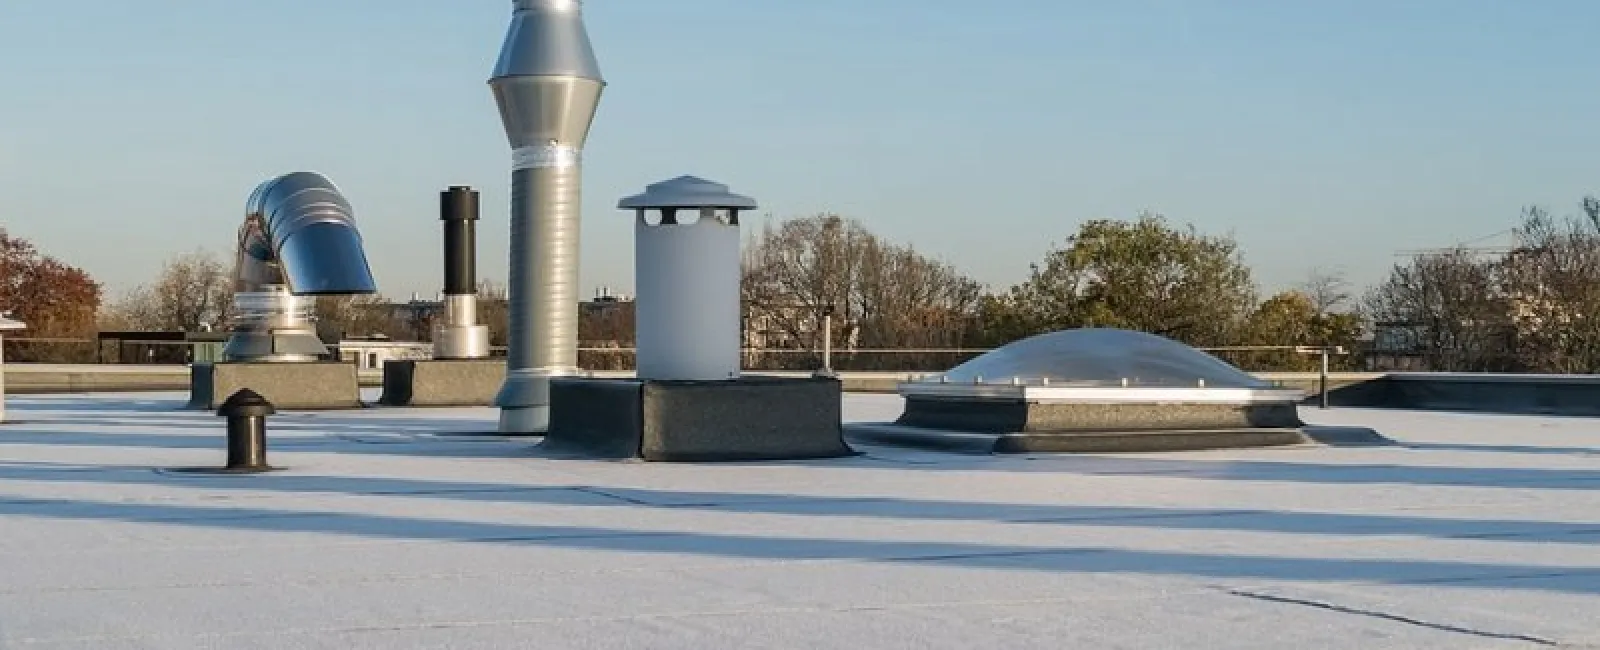 Types of Commercial Flat Roofs: Your Options